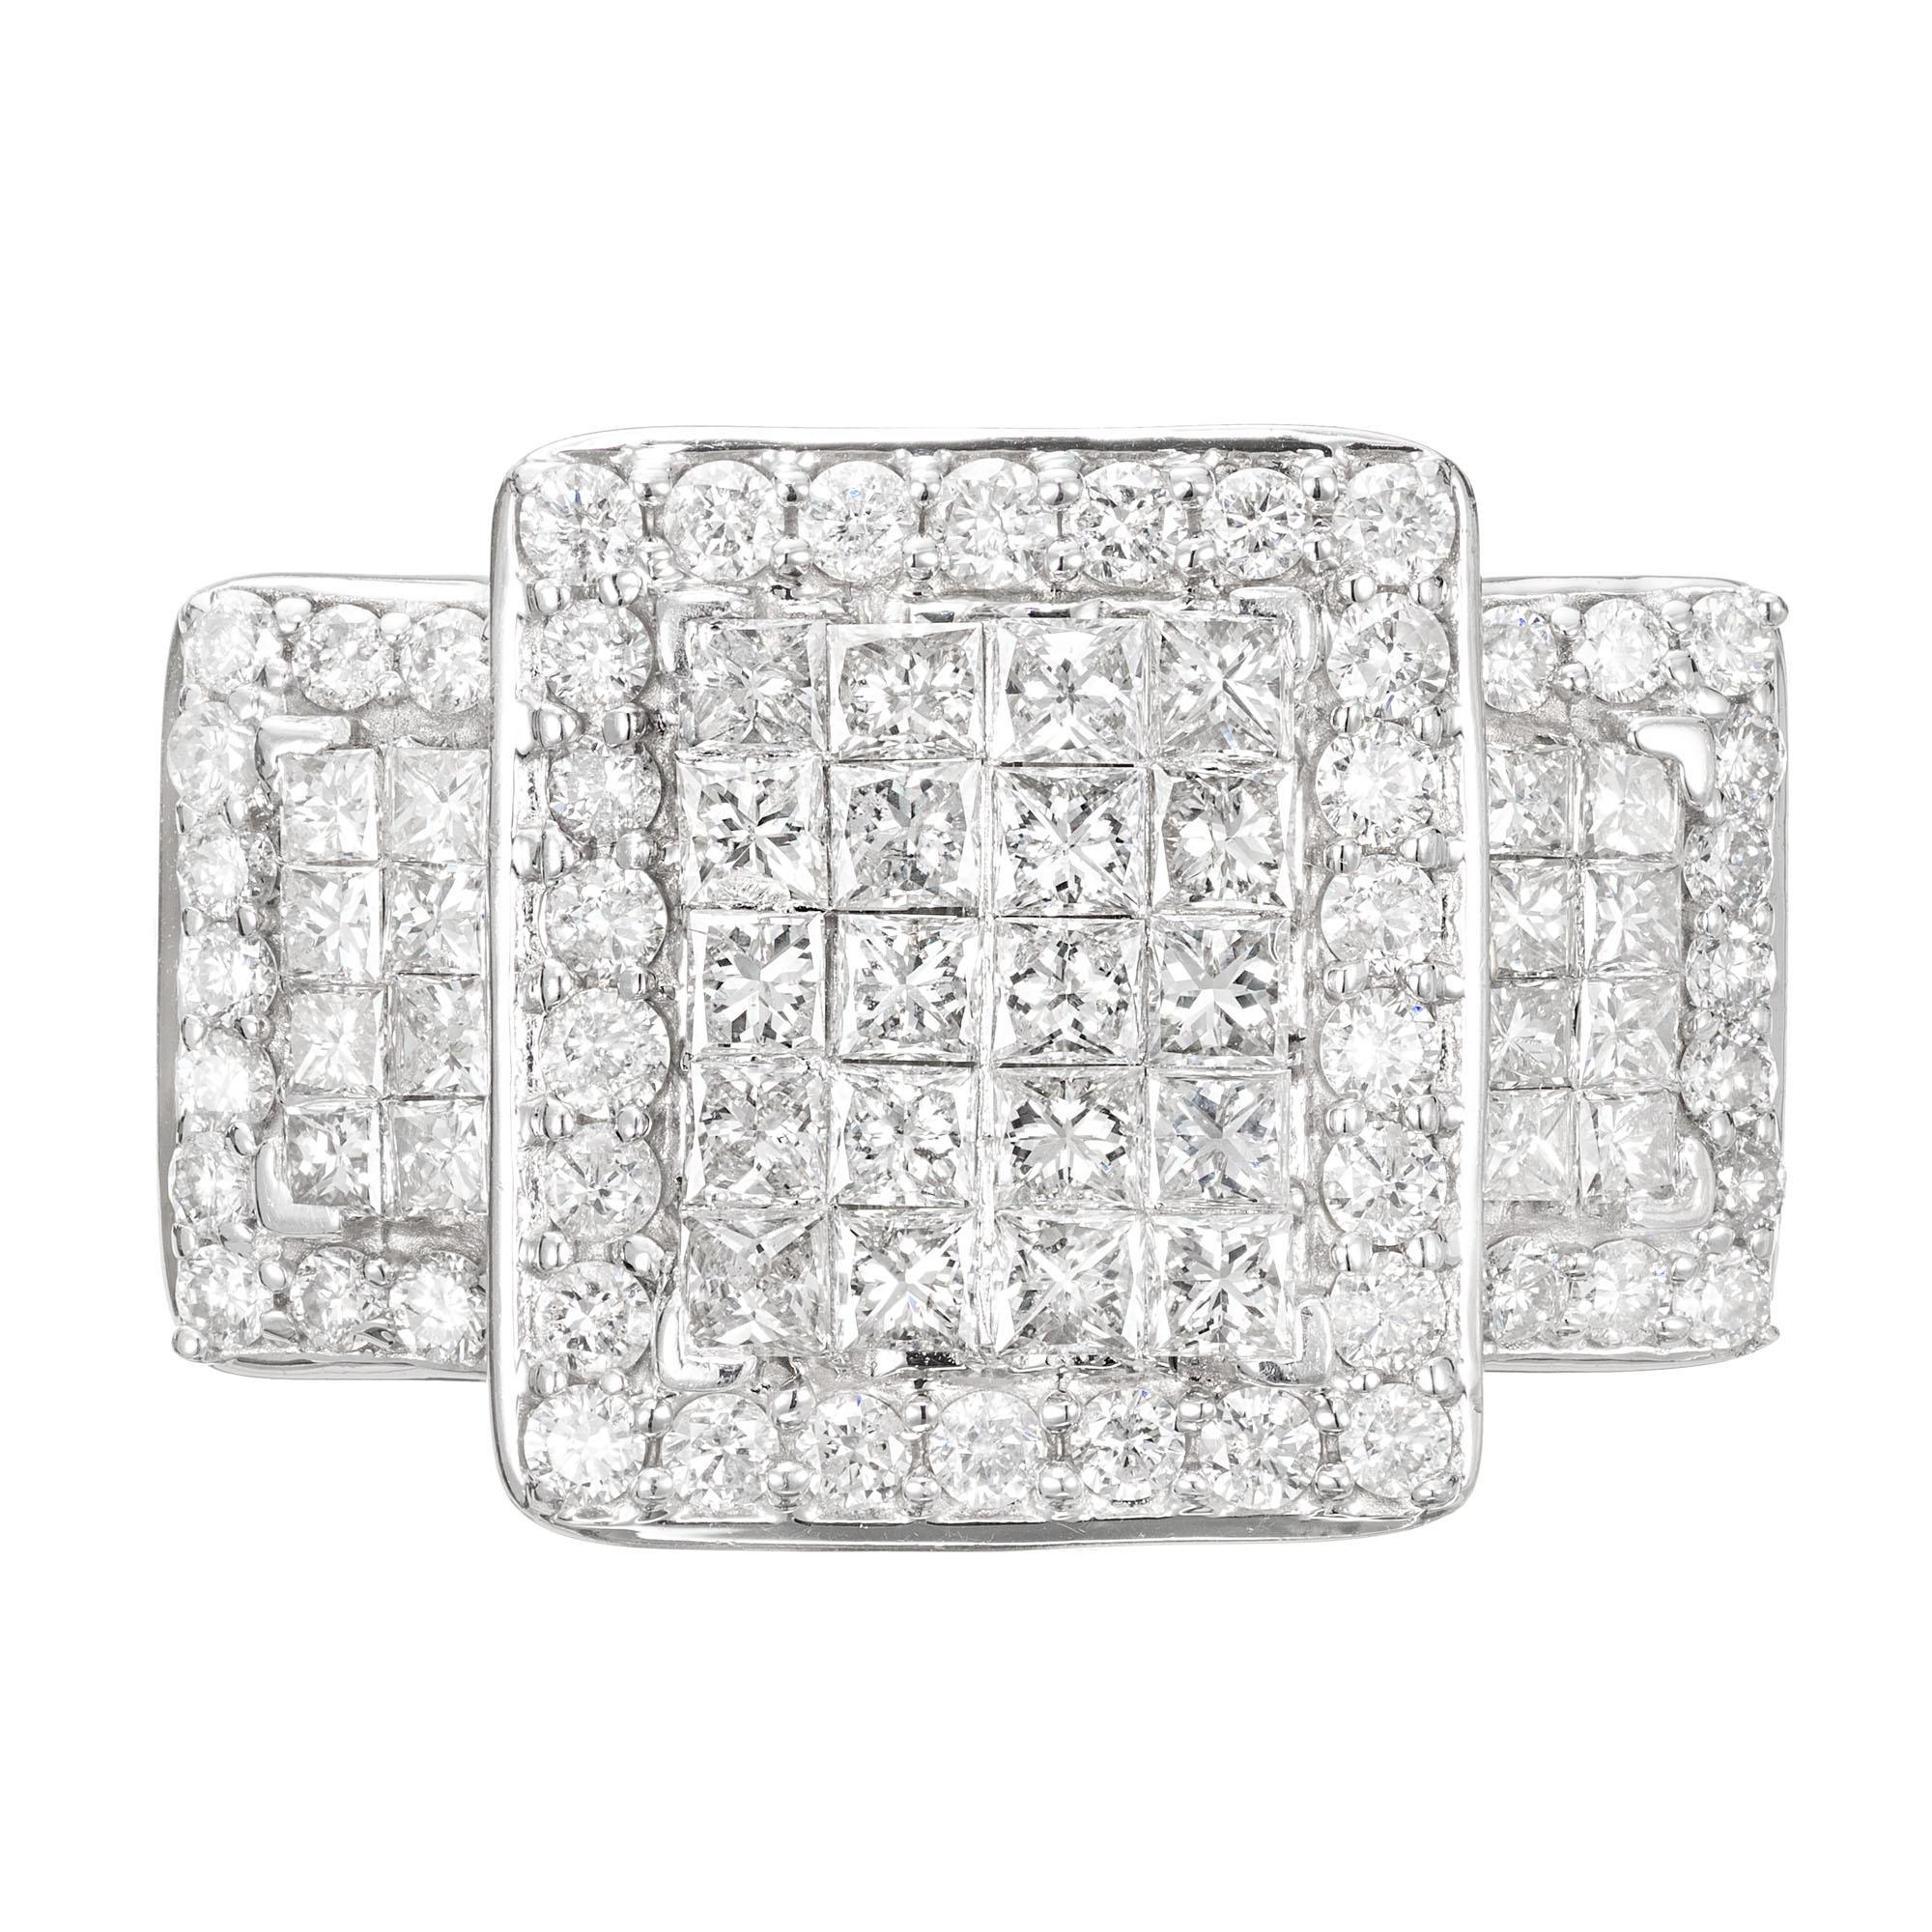 Kallati diamond ring. 36 invisible princess cut center stones with 3 halos of 48 round diamonds. The center section is 13.8 x 12mm. Each side section is 10 x 5.5mm.

36 Princess cut diamonds approx. total weight 1.80cts, G to H, VS to SI
48 round